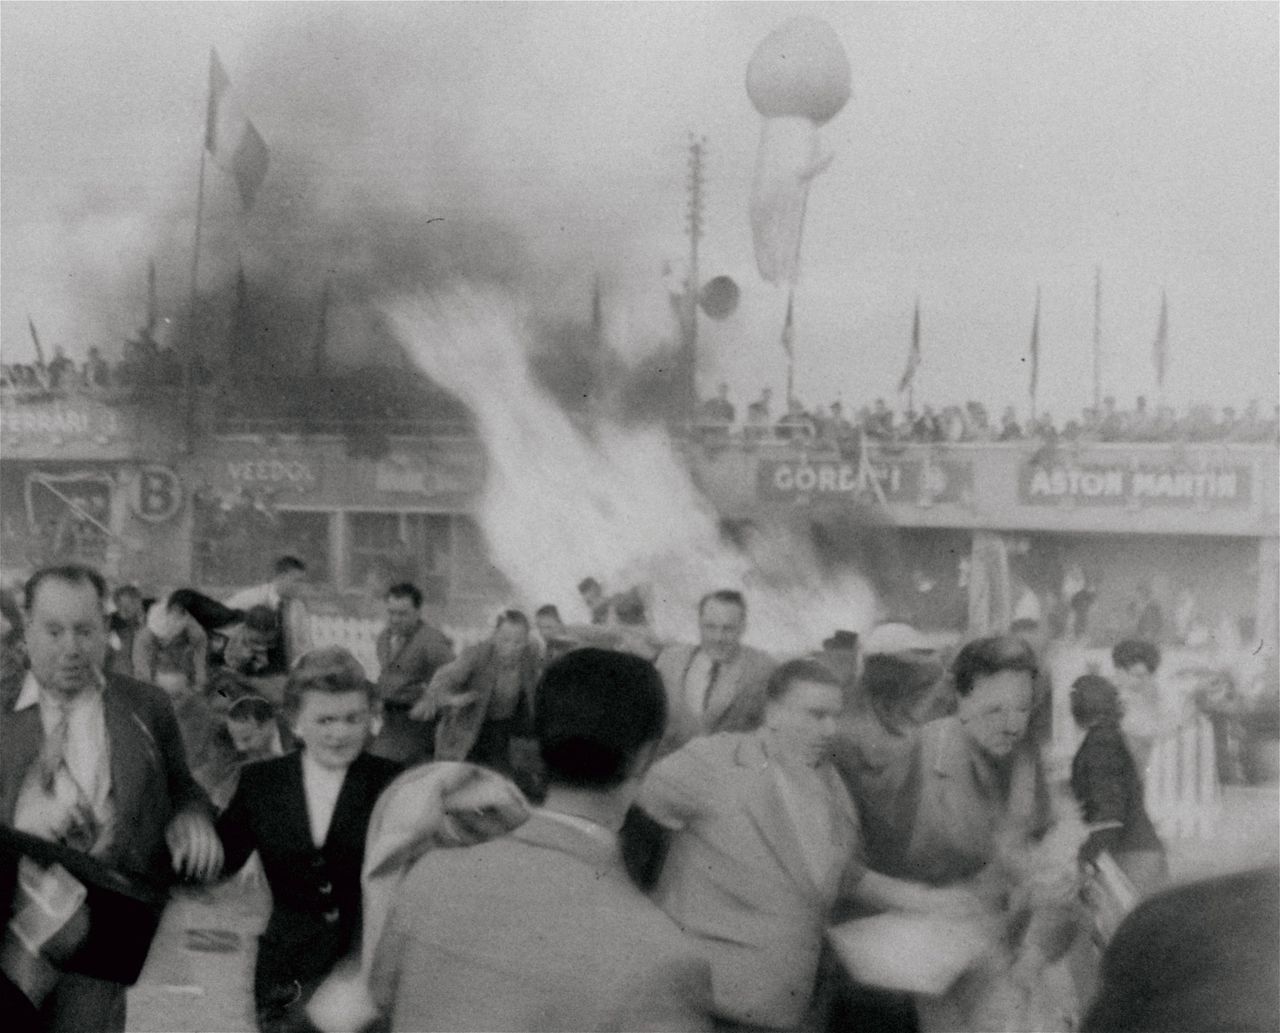 Spectators running from a fuel and magnesium fire at the 1955 Le Mans race